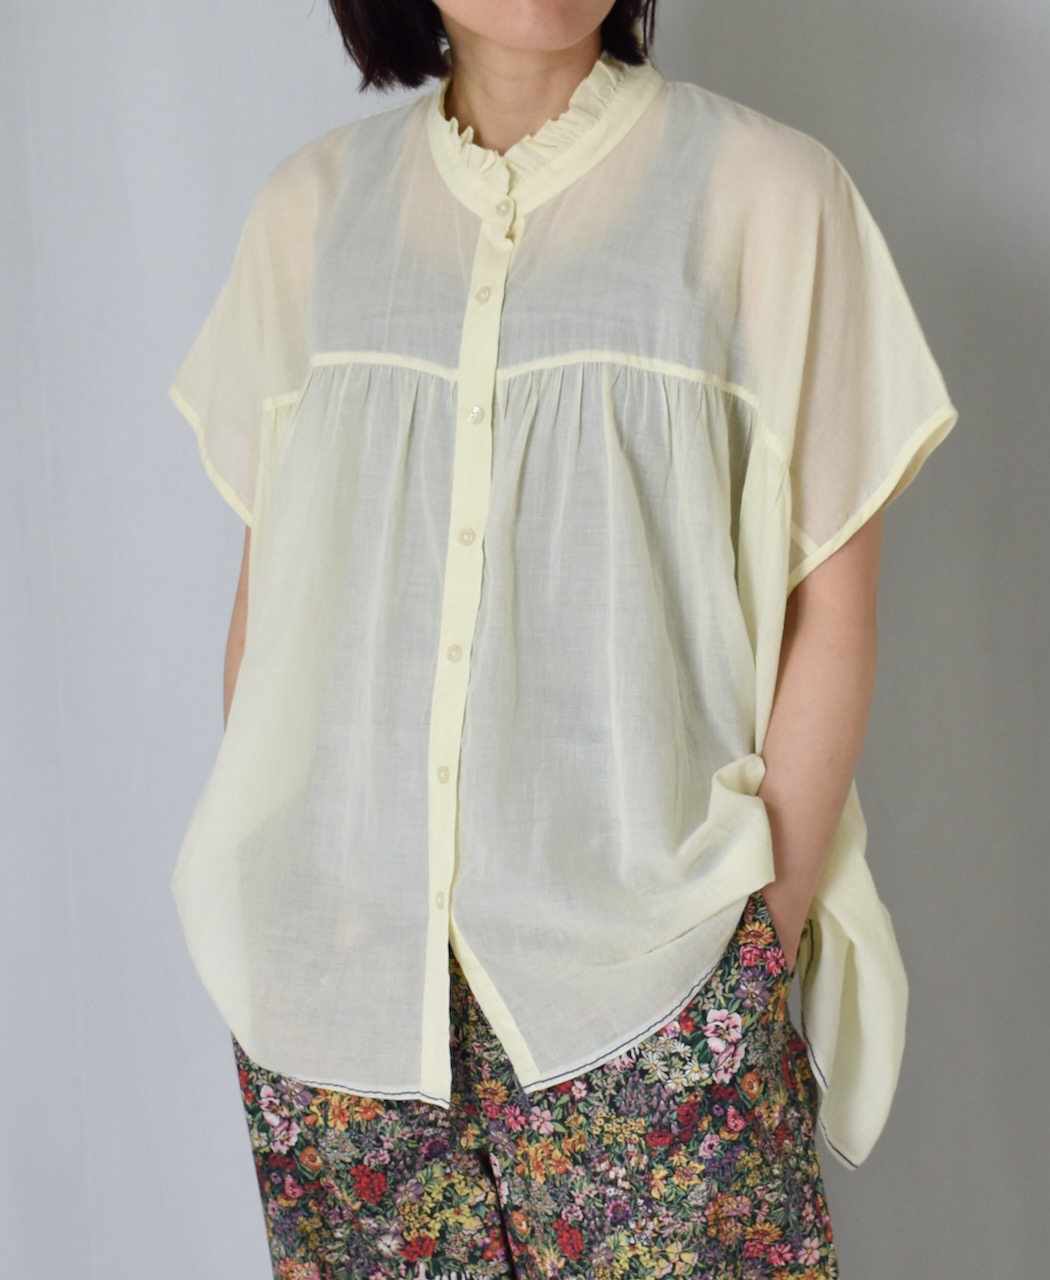 NSL24001 (ブラウス) SUPER FINE VOILE PLAIN WITH SELVAGE FRILL COLLAR FRENCH/SL SHIRT